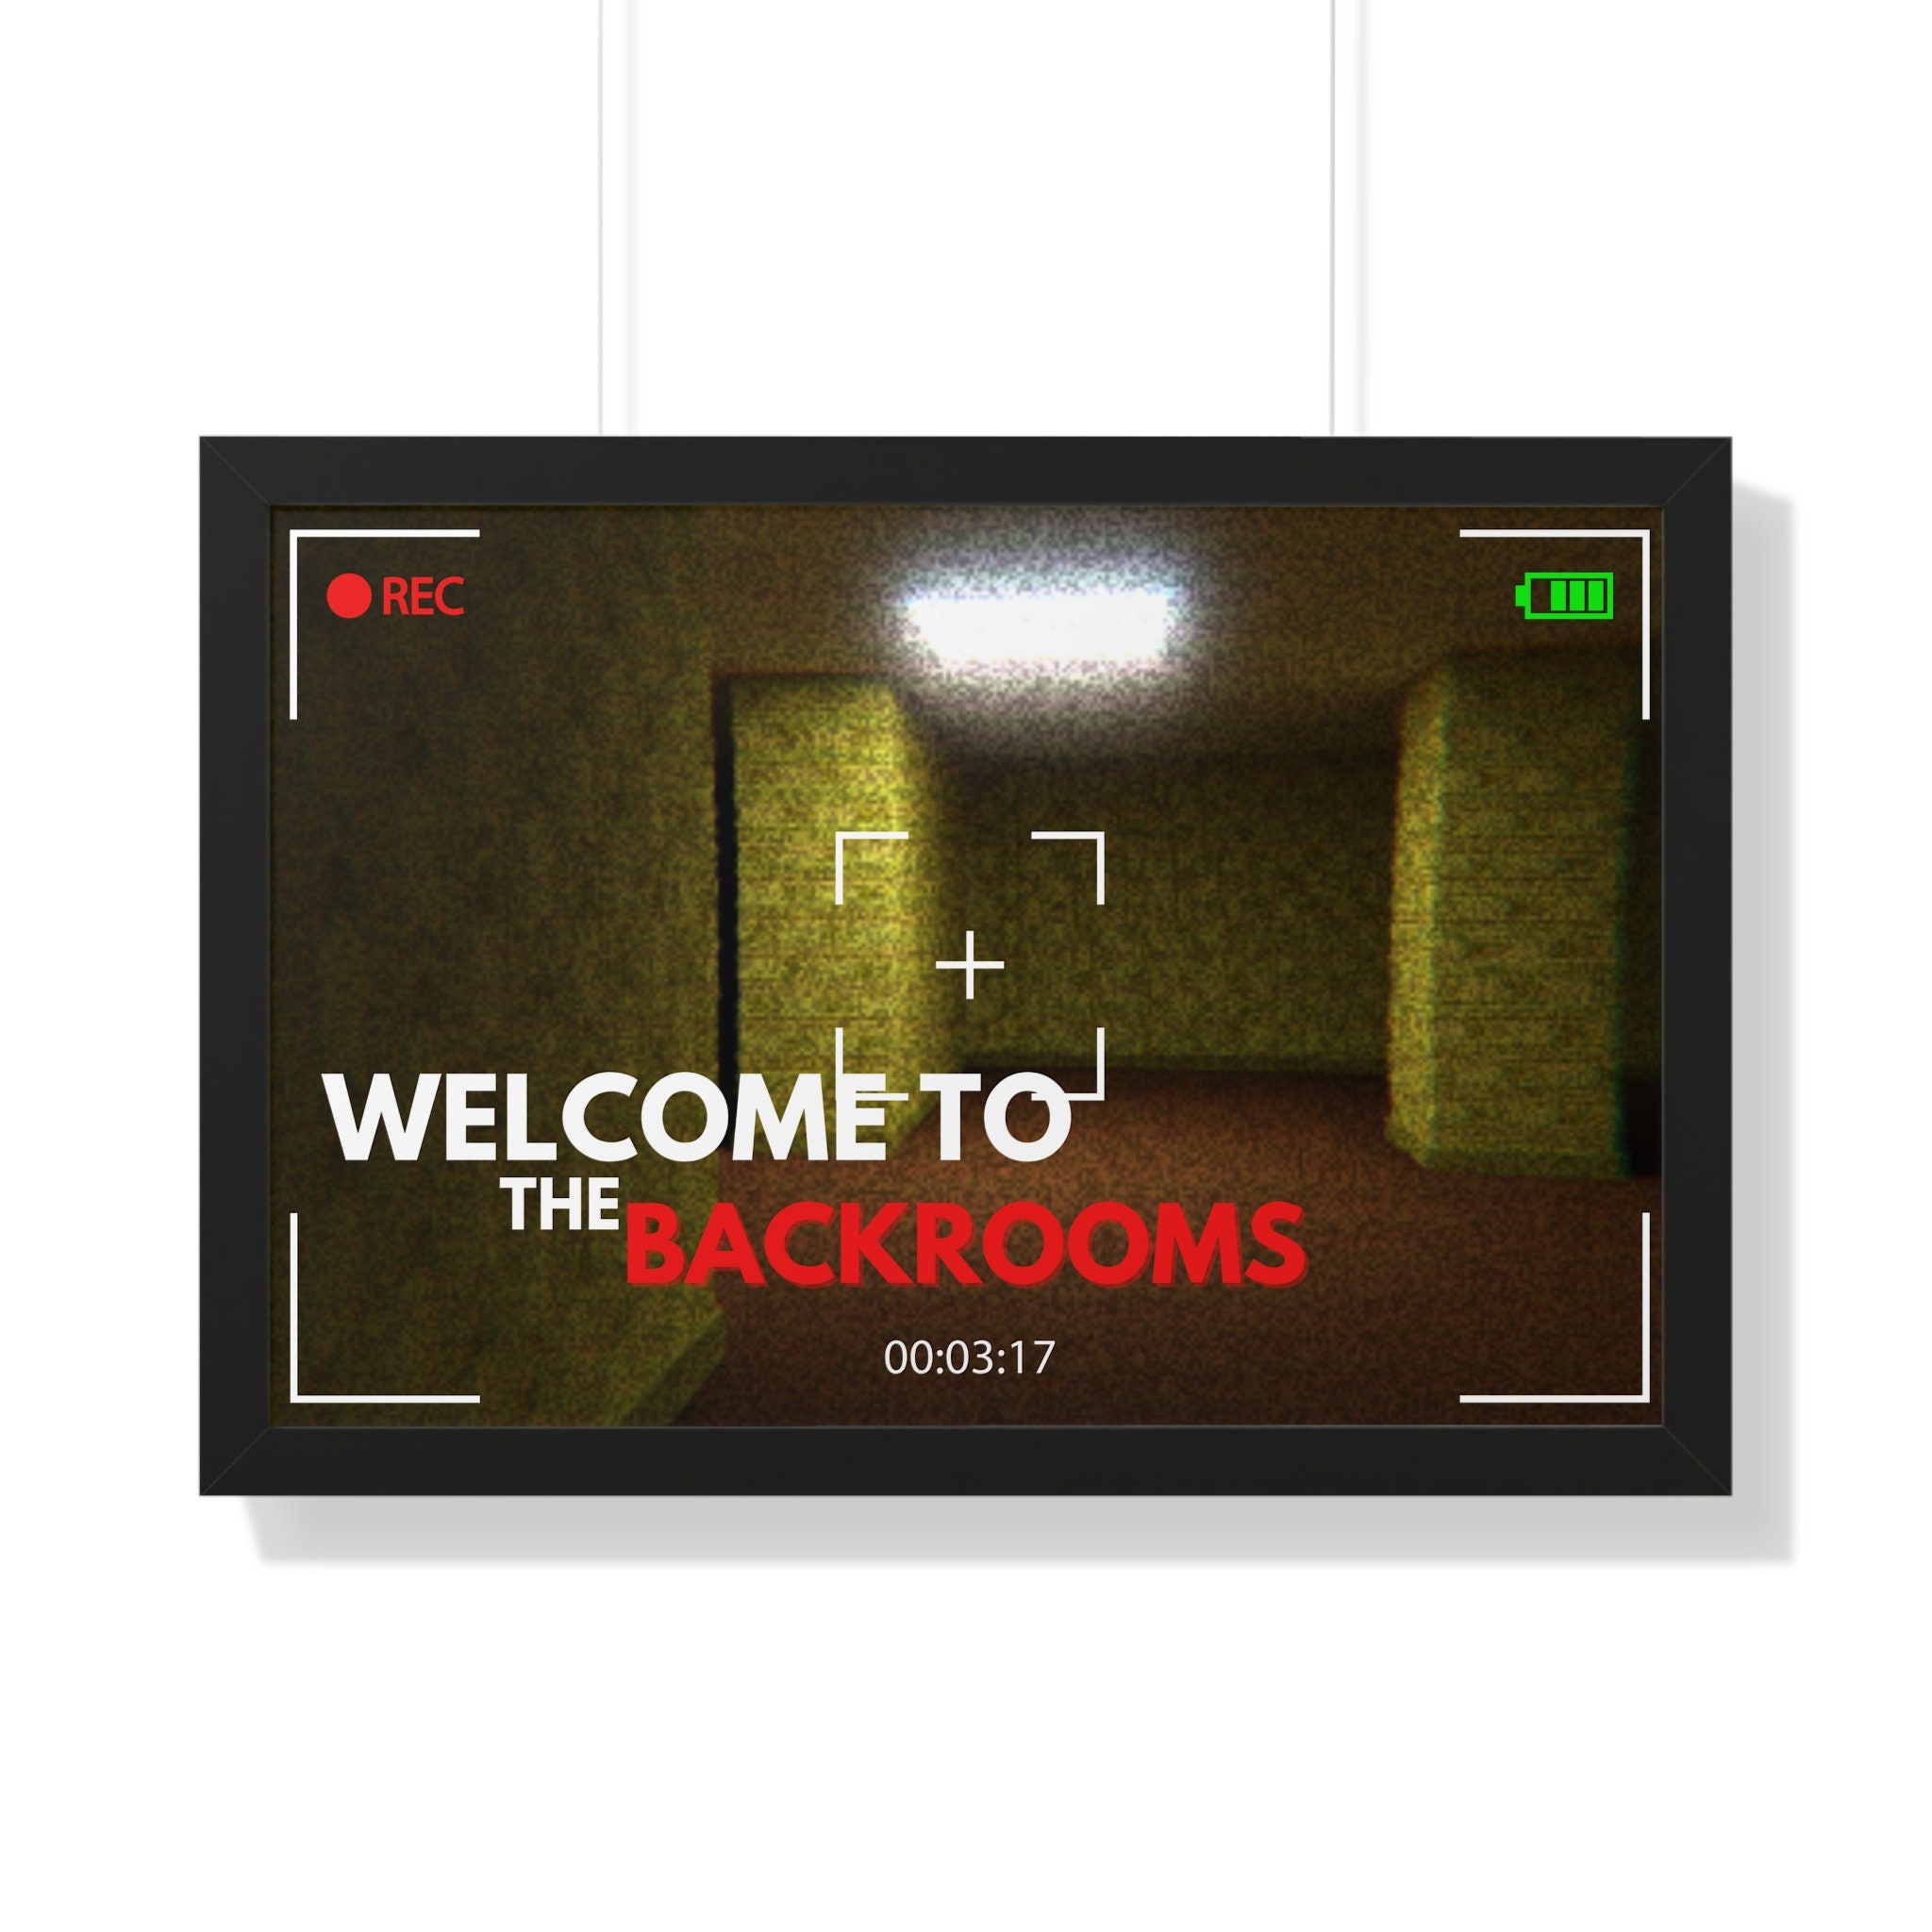 Project : Backrooms on X: -[LEVEL 3 TEASER 2]- -[THE BACKROOMS